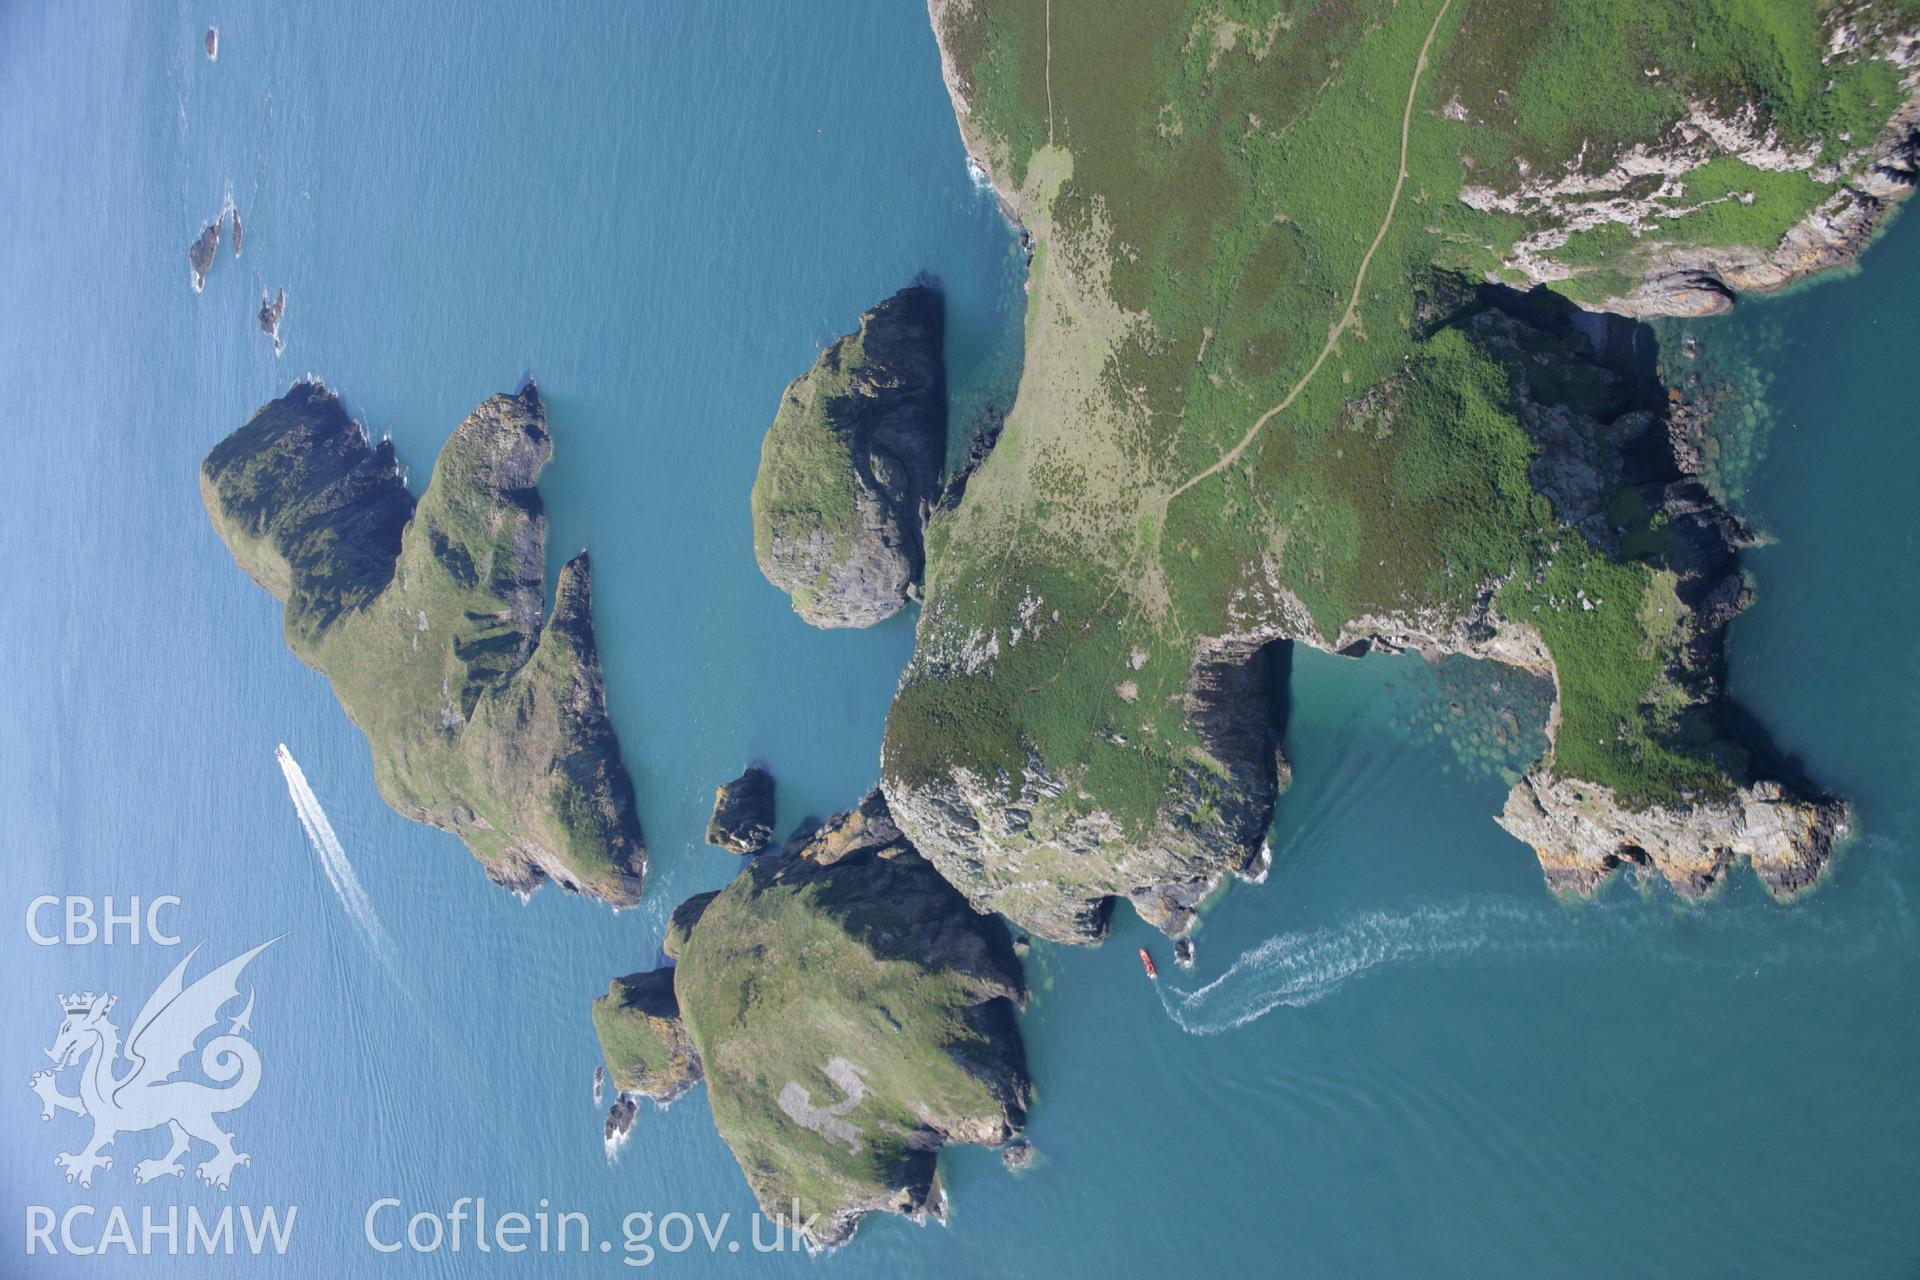 RCAHMW colour oblique aerial photograph of Ramsey Island. Taken on 14 July 2006 by Toby Driver.